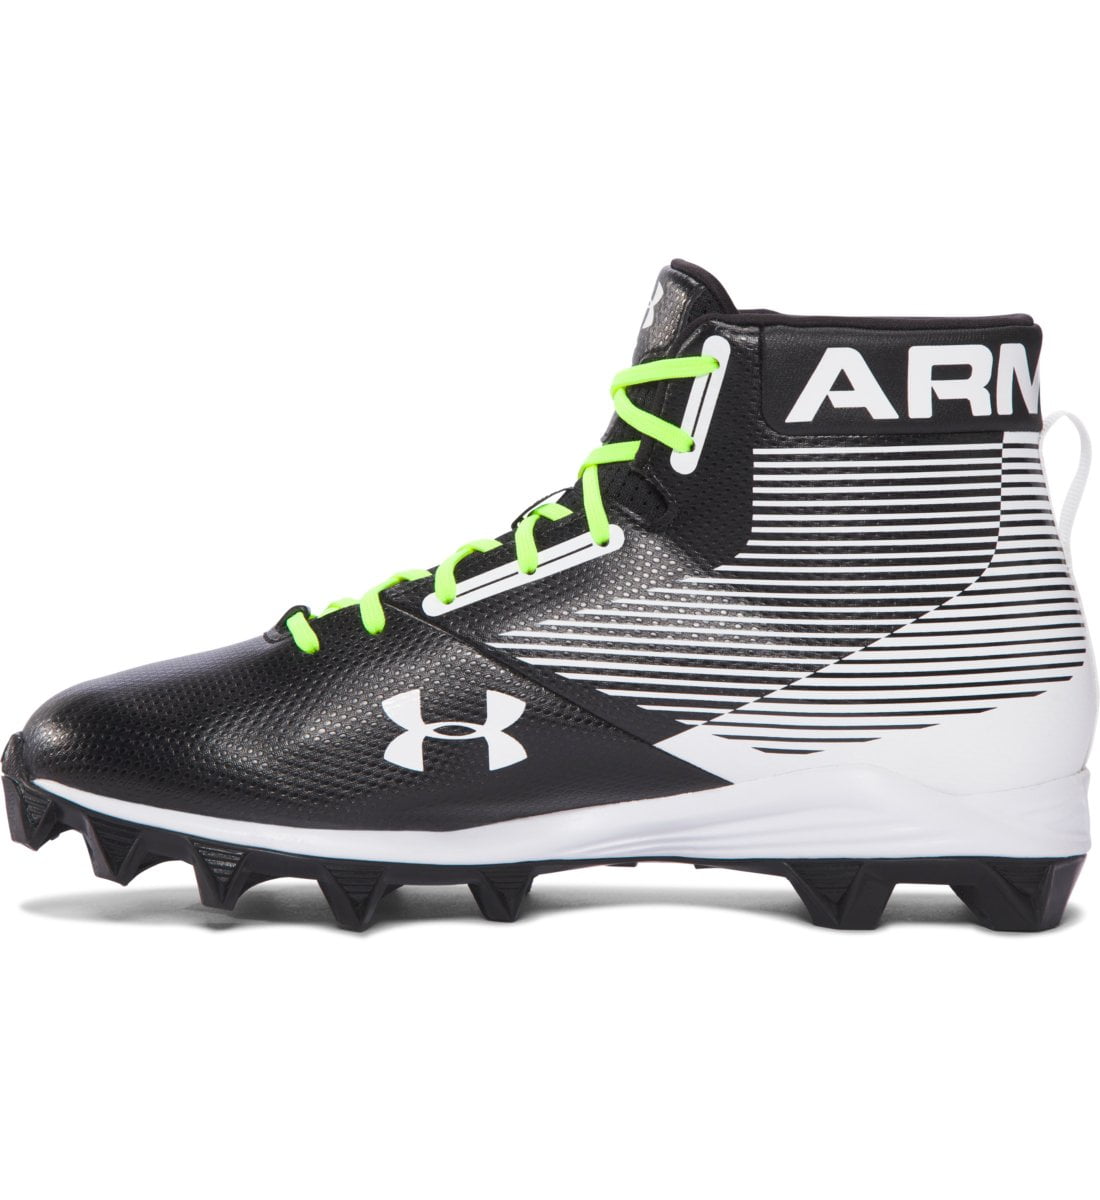 Men's Size 6-14 Under Armour Hammer Mid RM Molded Football Cleats 1289761-011 